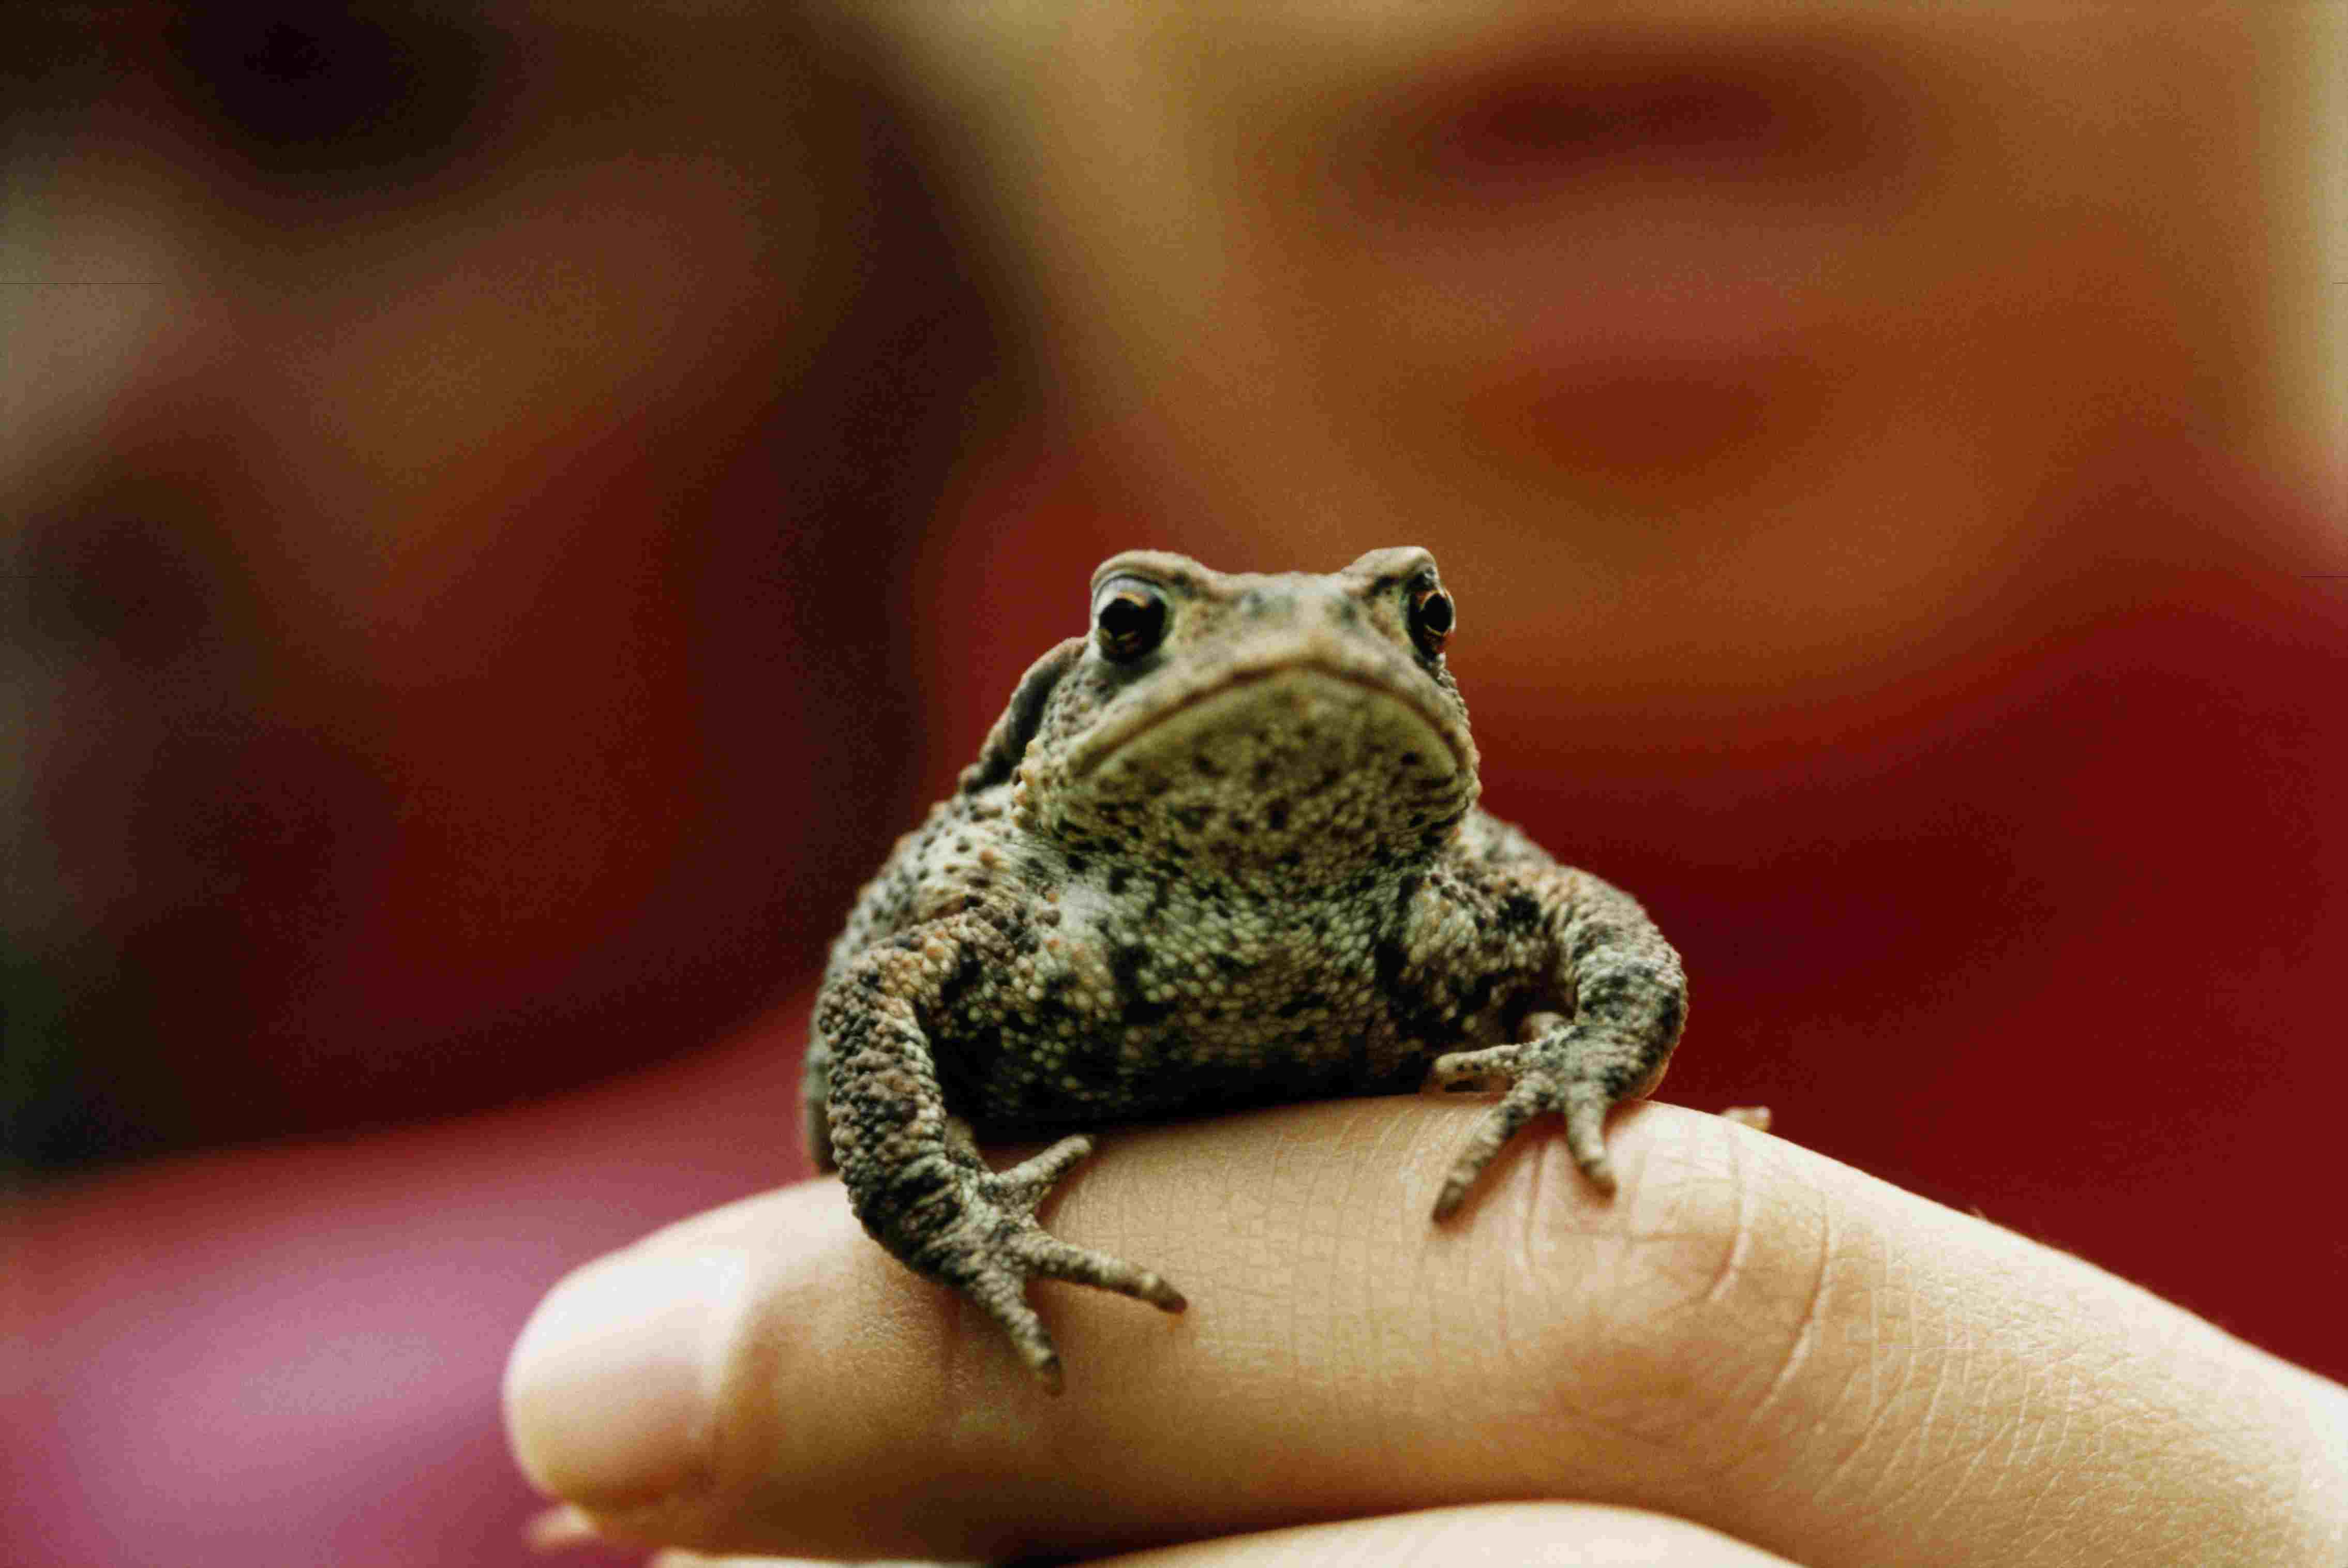 small frog in a person's hand